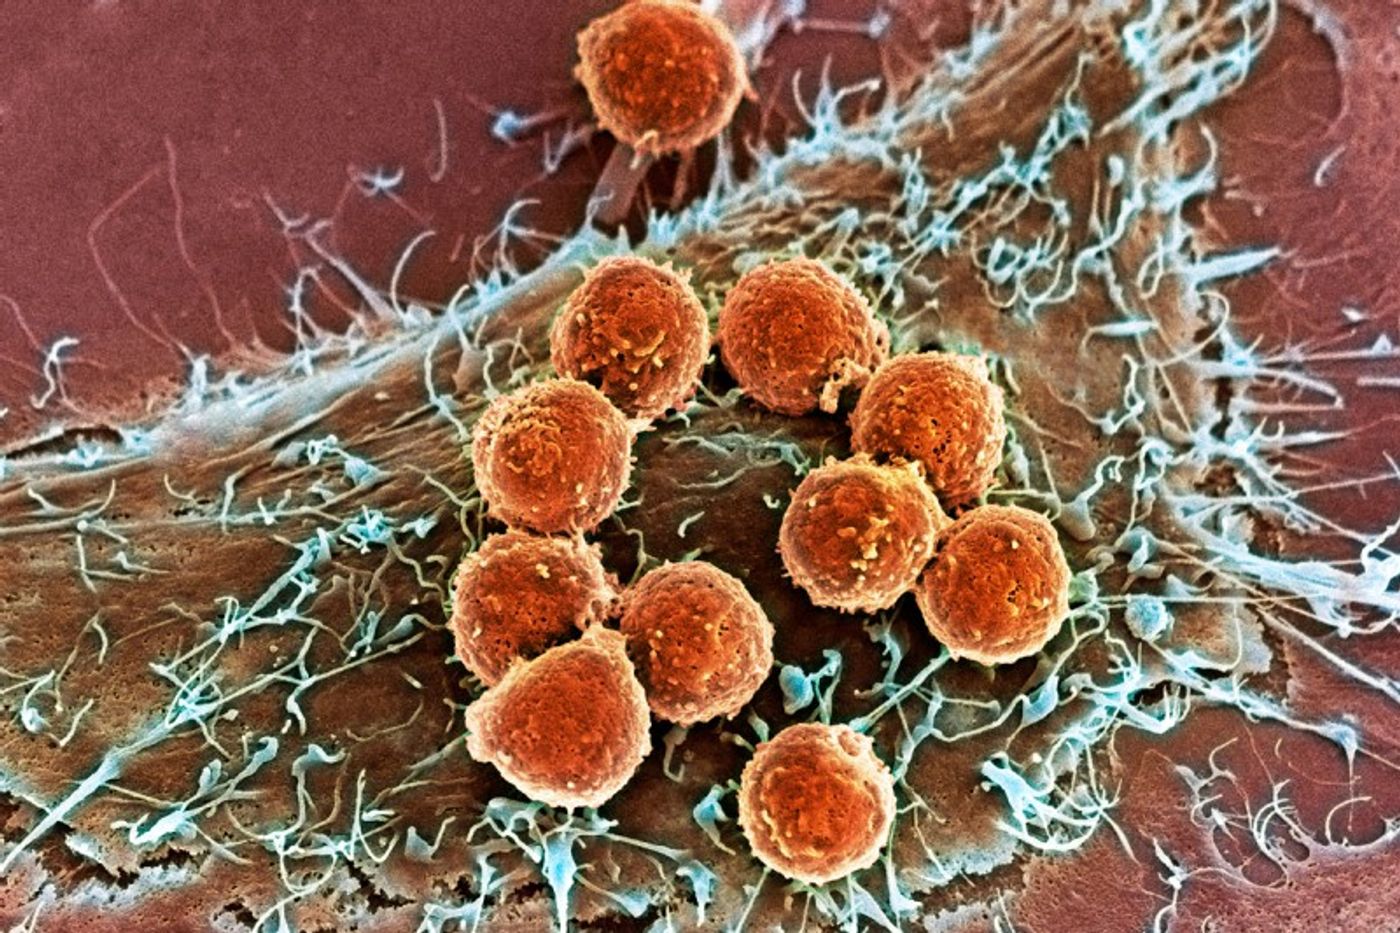 Scanning electron microscope image of immune cells attacking a cancer cell (mskcc.org)